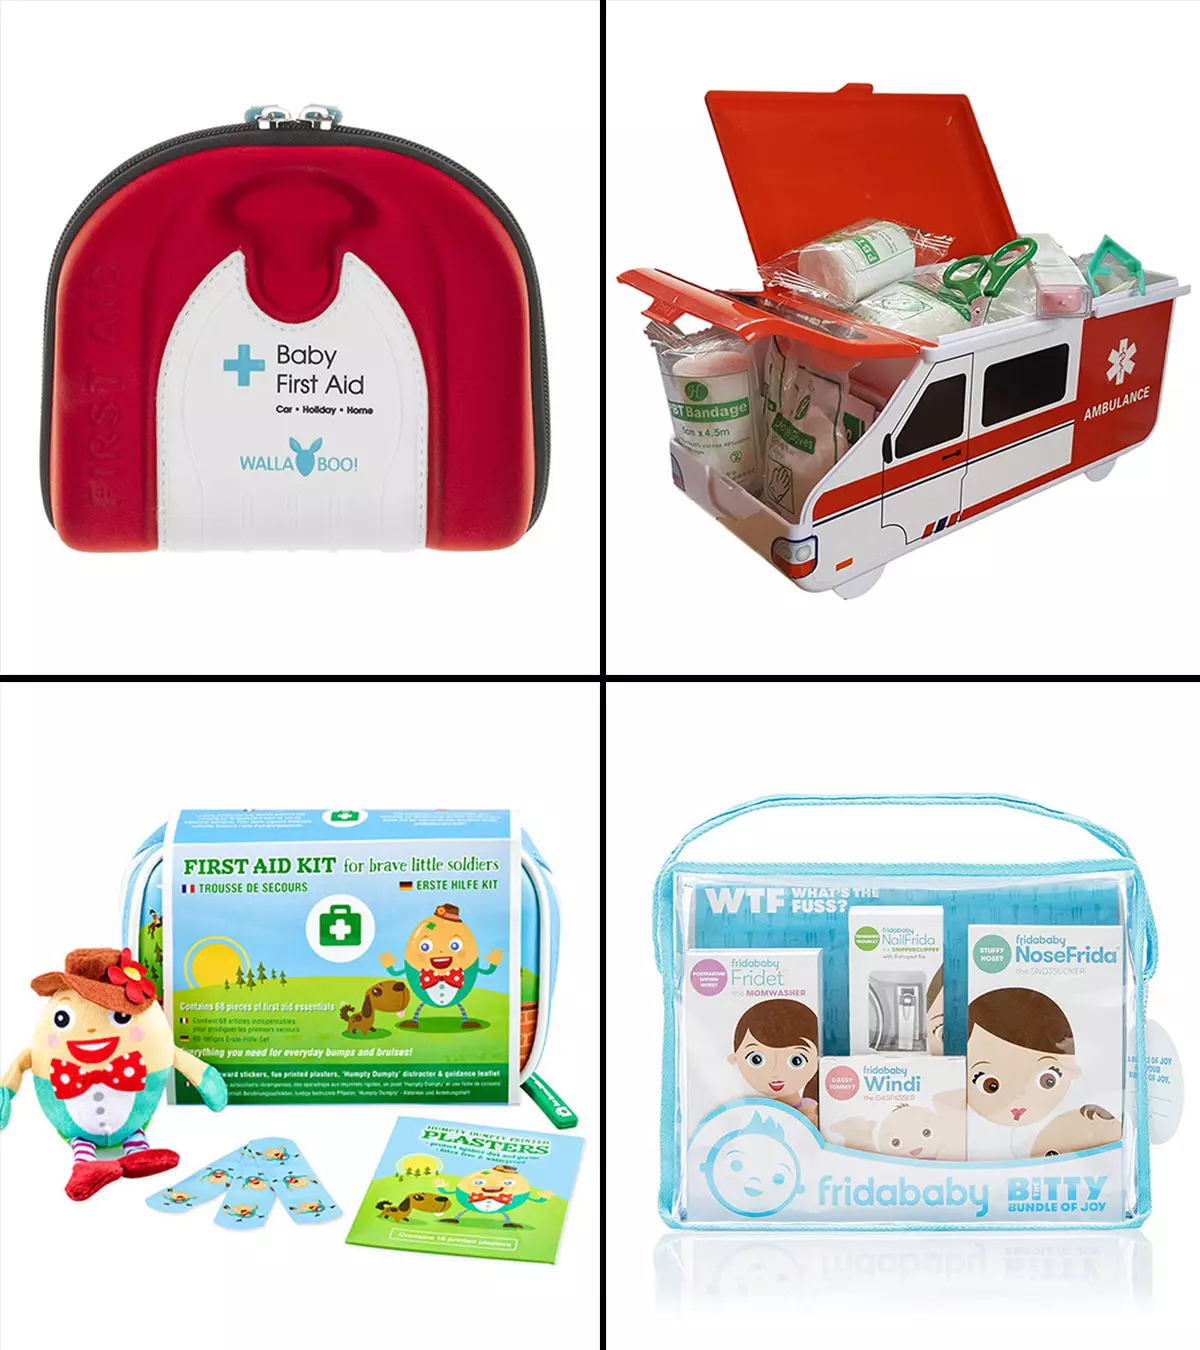 Baby First Aid Kits